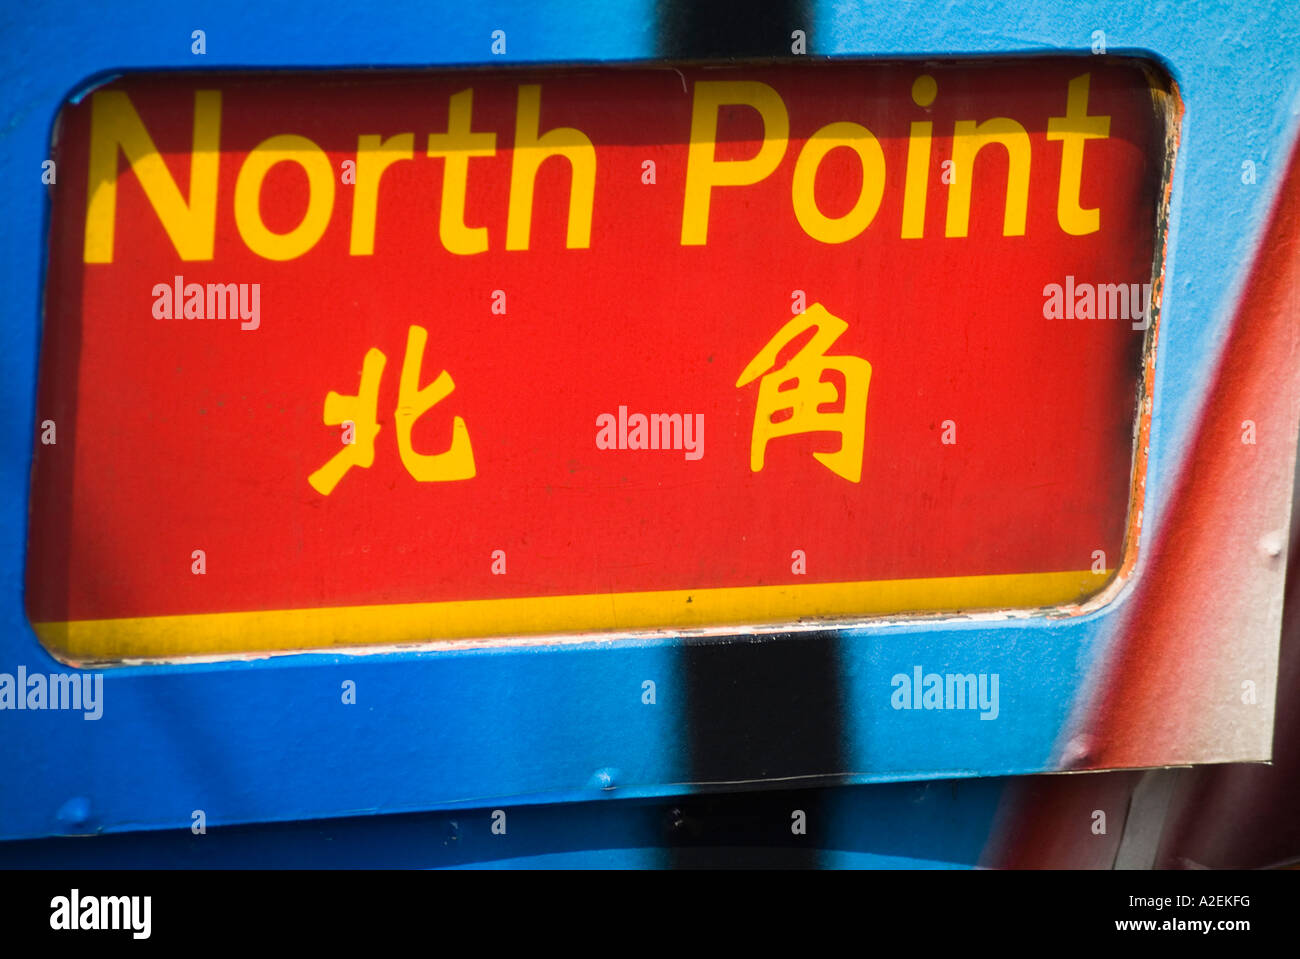 dh  TRAM HONG KONG North Point trams destination sign in English and Chinese calligraphy hk writing translation bilingual language signs bhz Stock Photo